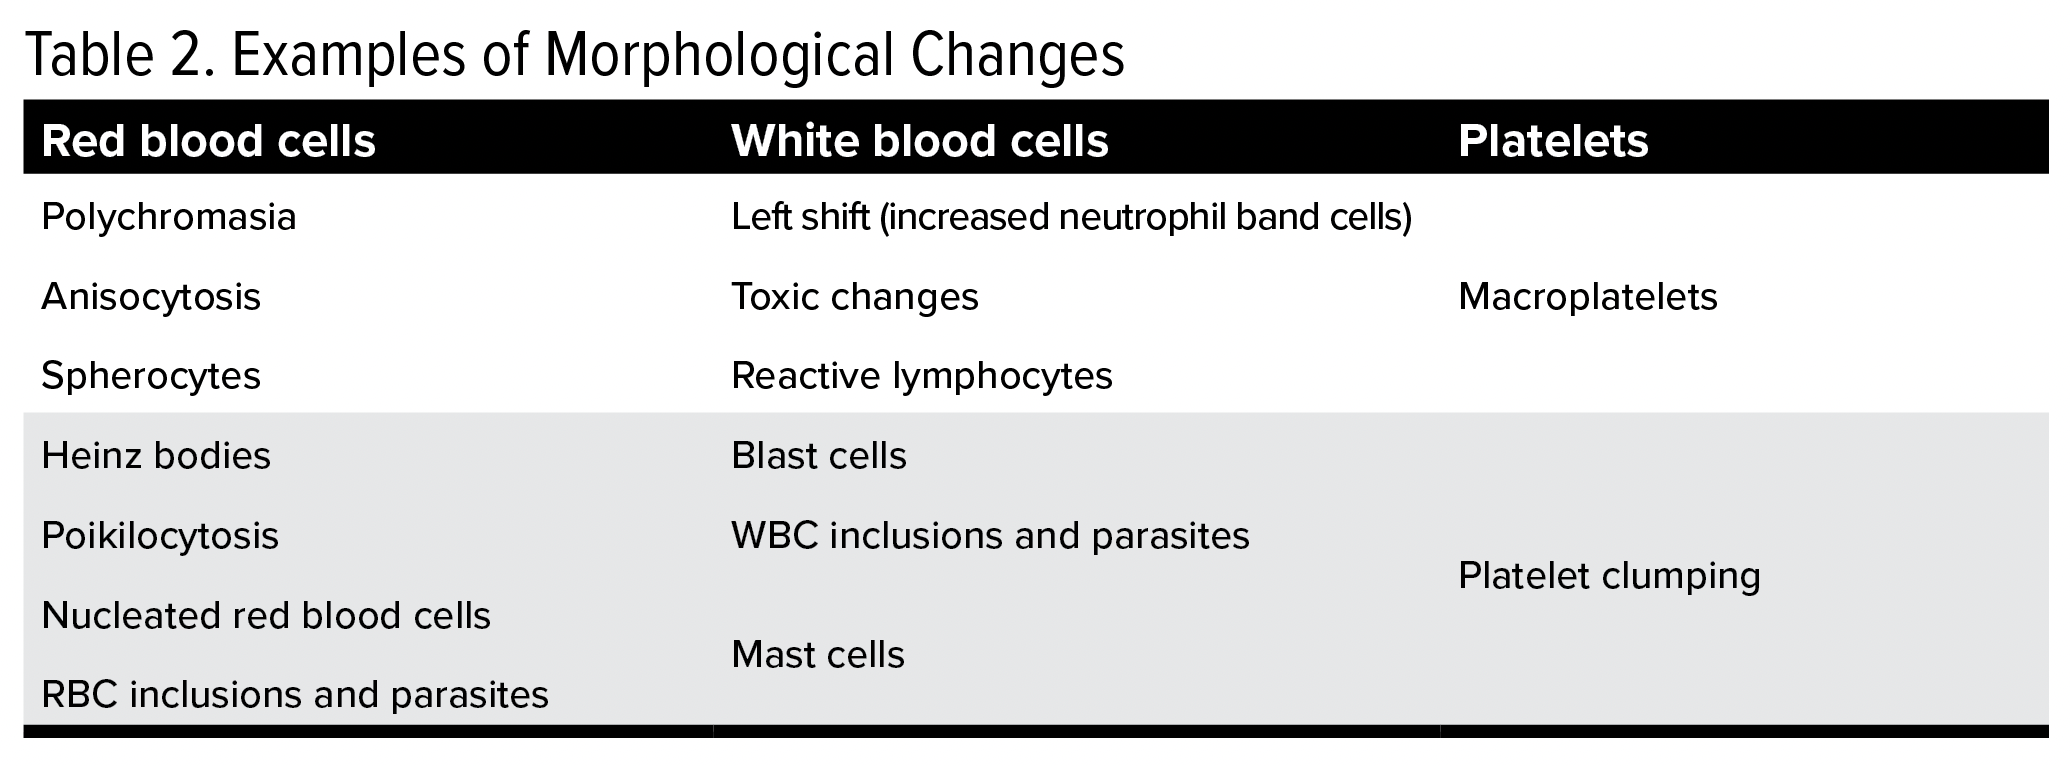 Examples of Morphological Changes